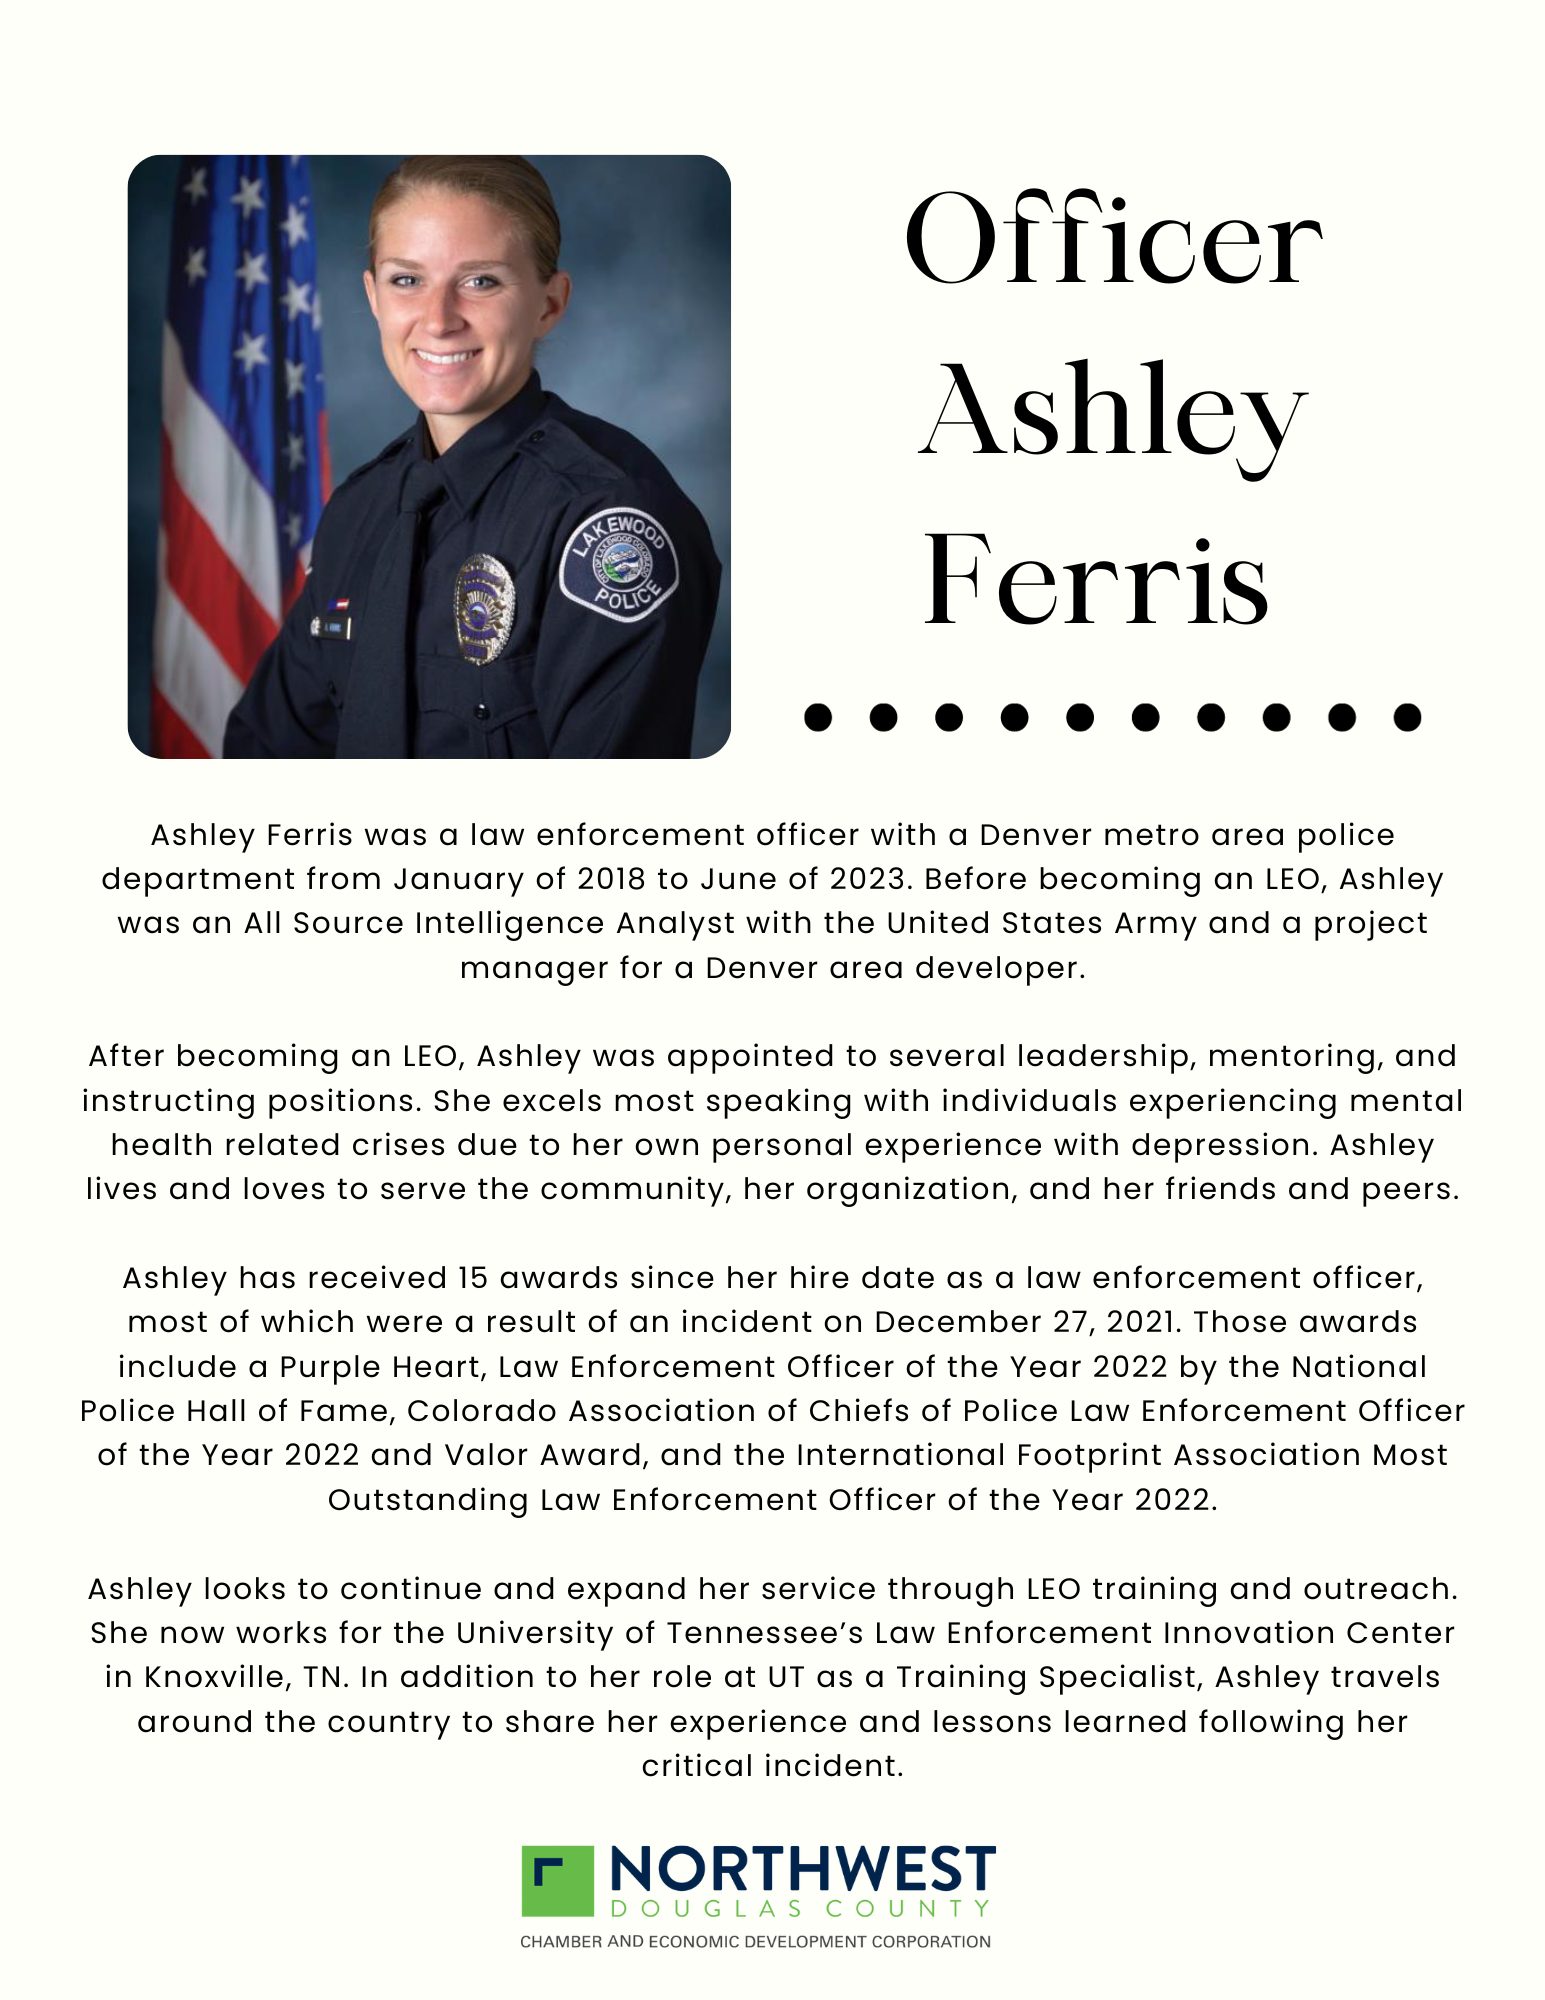 Officer Ferris Honoree Intro